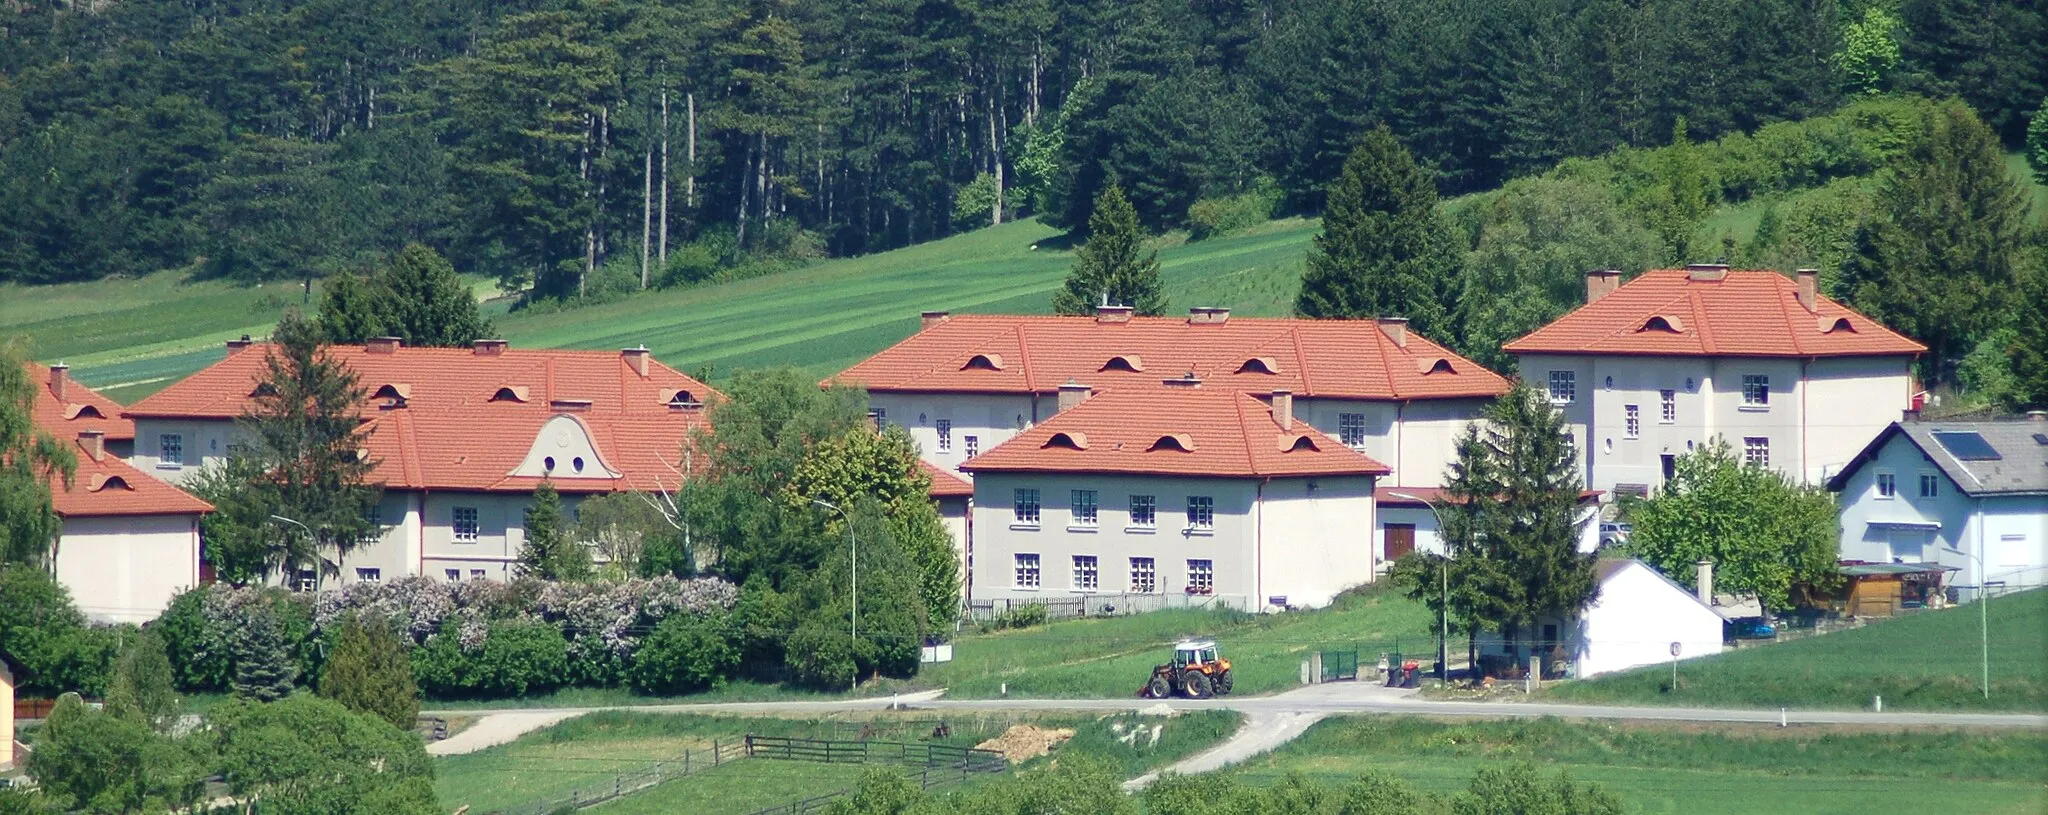 Photo showing: The settlement Neue Kolonie was built in 1919 for the miners of the Grillenberg brown coal mine. It is located in Veitsau in the municipality of Berndorf, Lower Austria. It is a cultural heritage monument now.